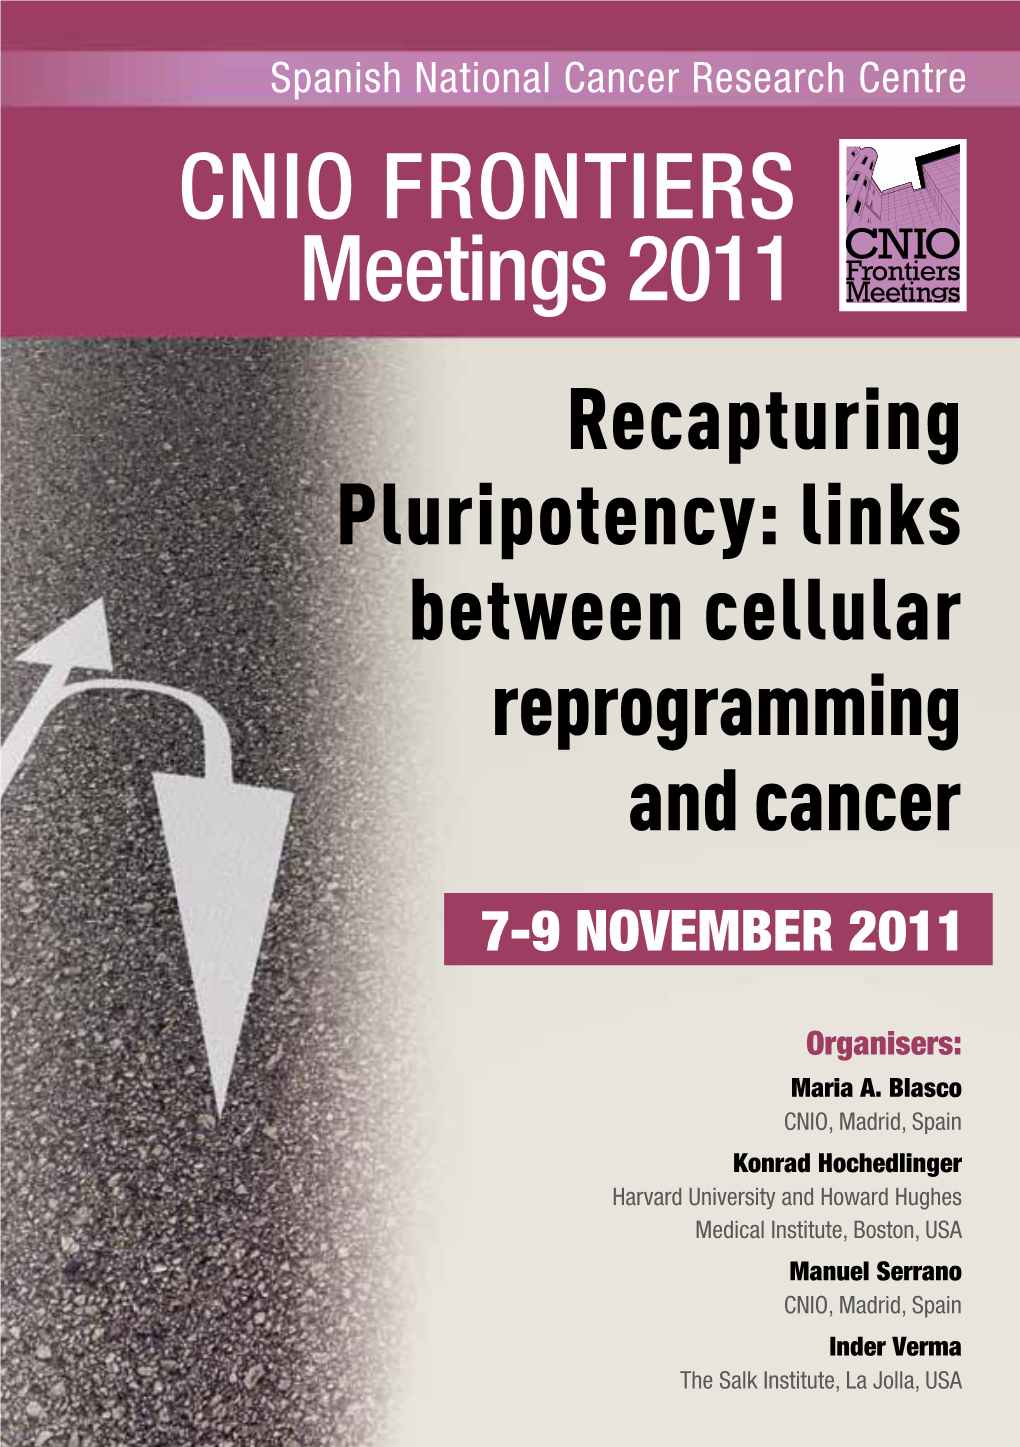 CNIO FRONTIERS Meetings 2011 Recapturing Pluripotency: Links Between Cellular Reprogramming and Cancer